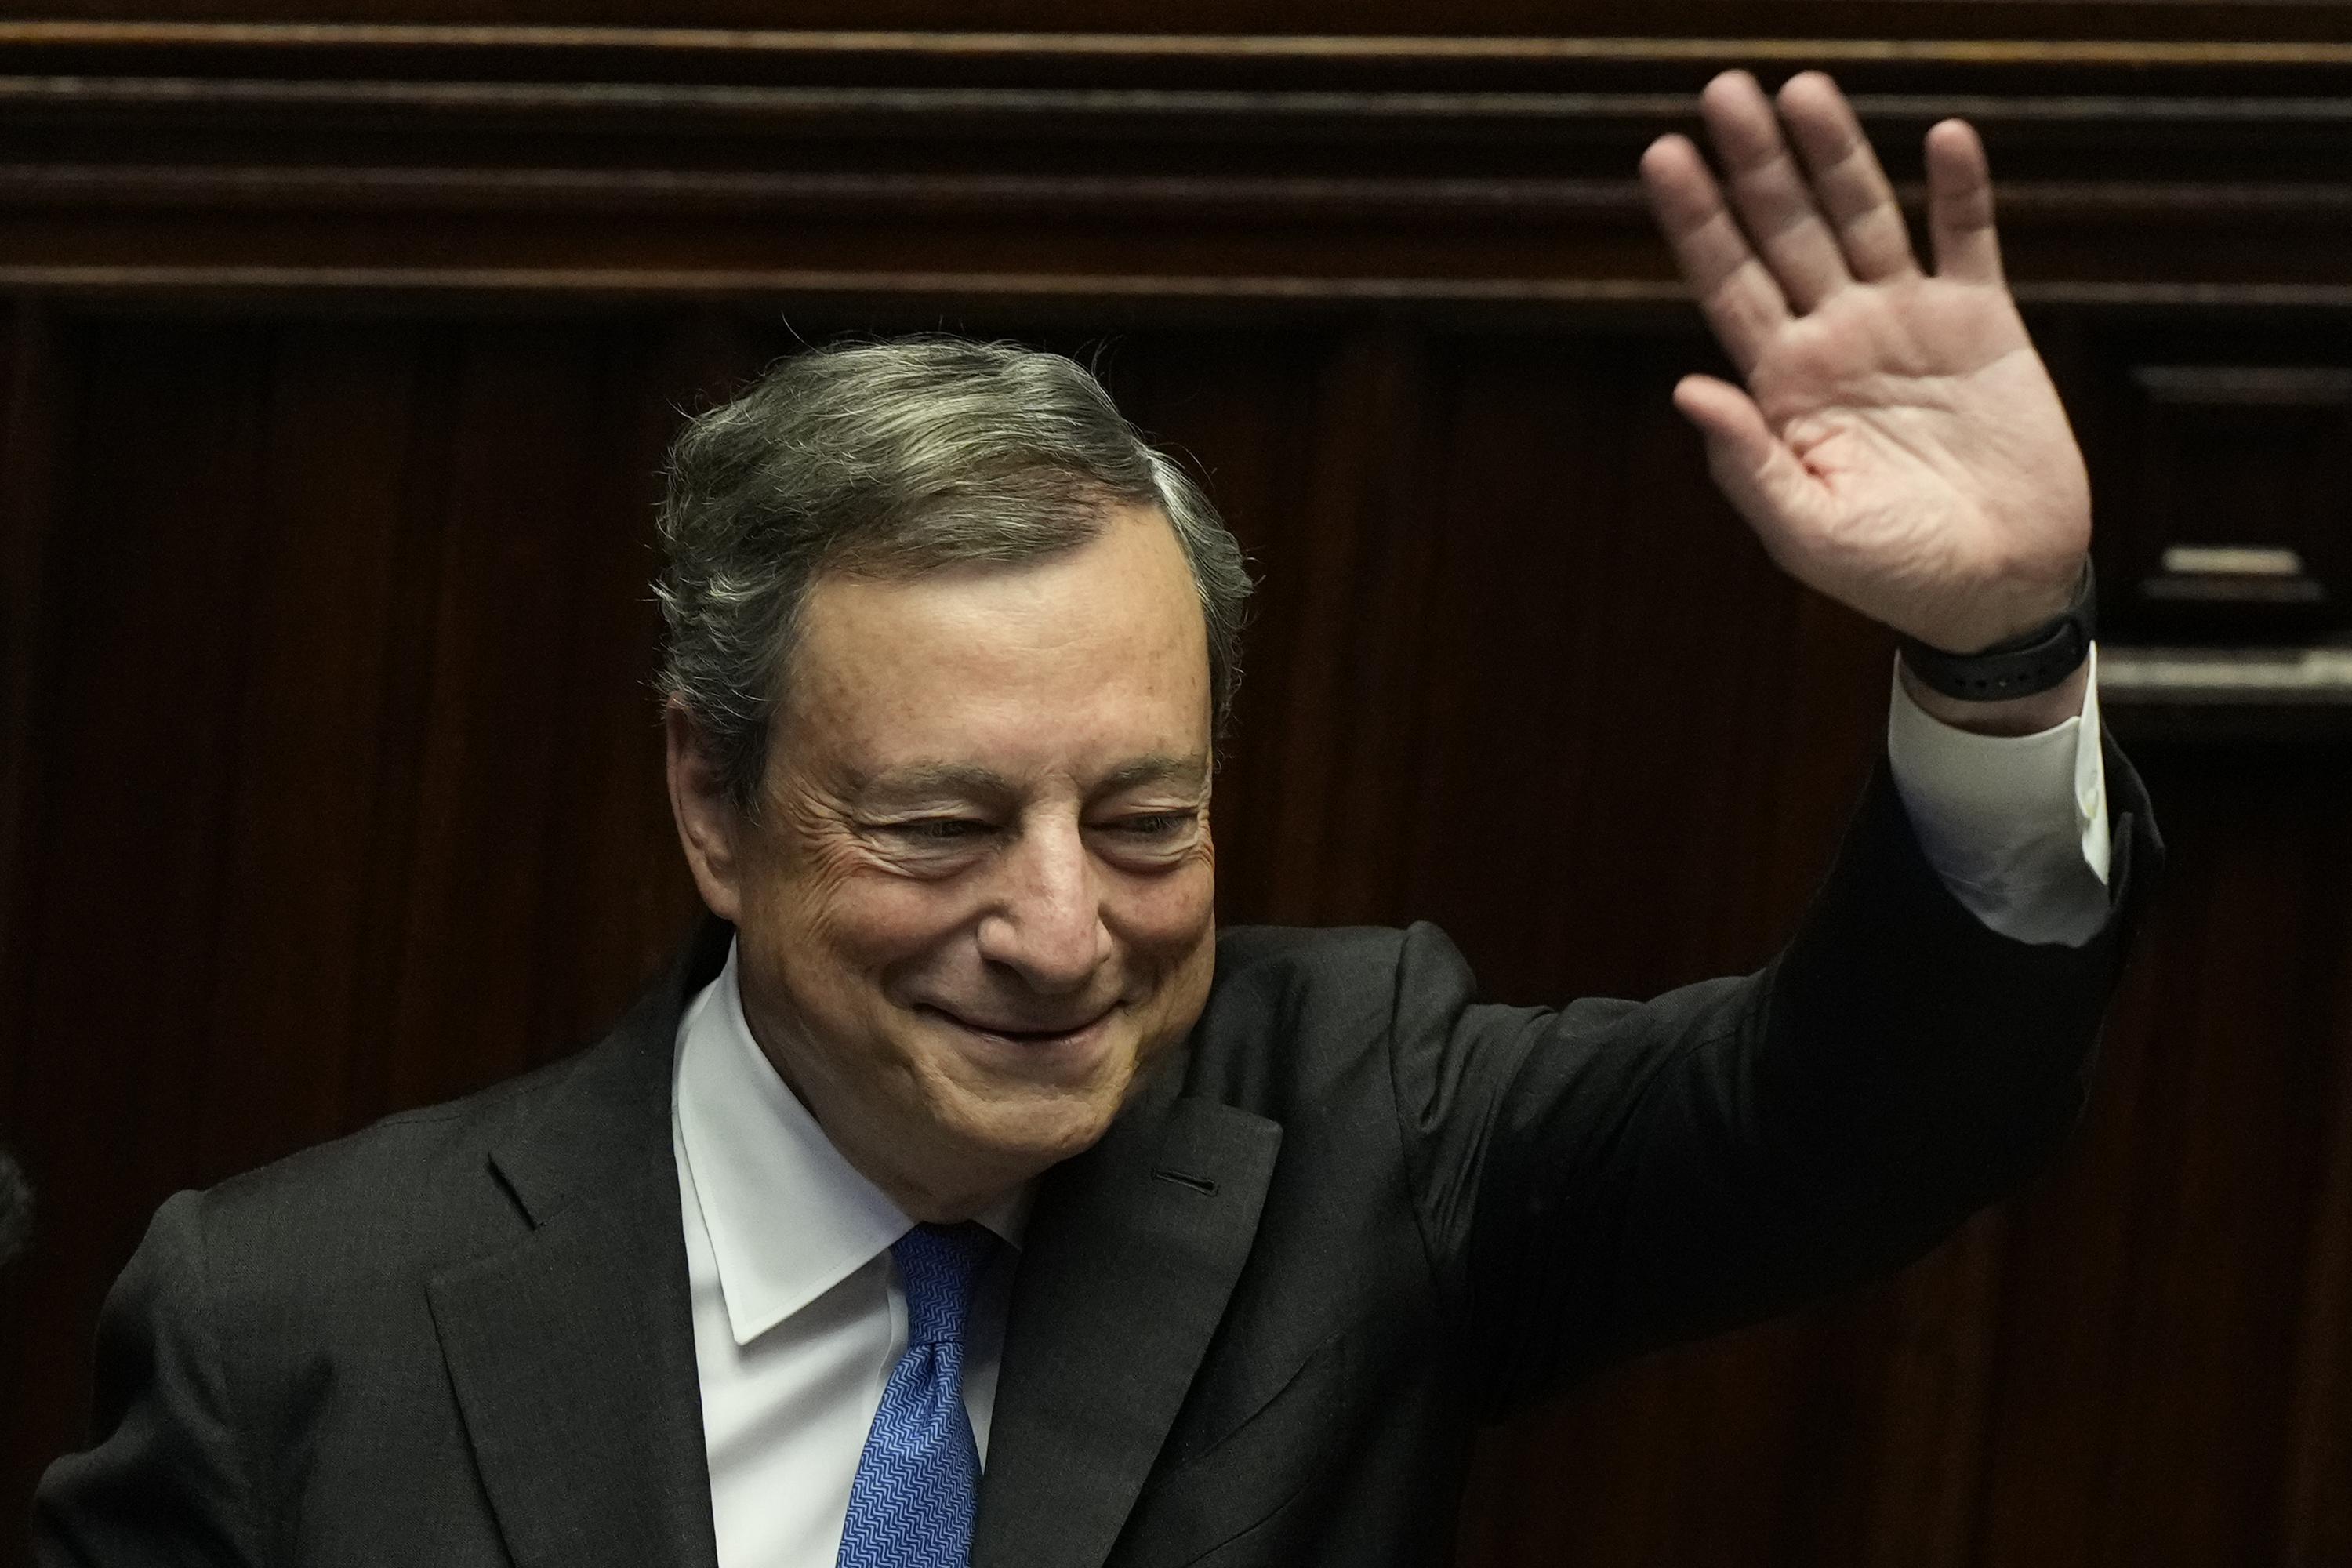 Italy’s Draghi resigns spelling trouble for nation Europe – The Associated Press